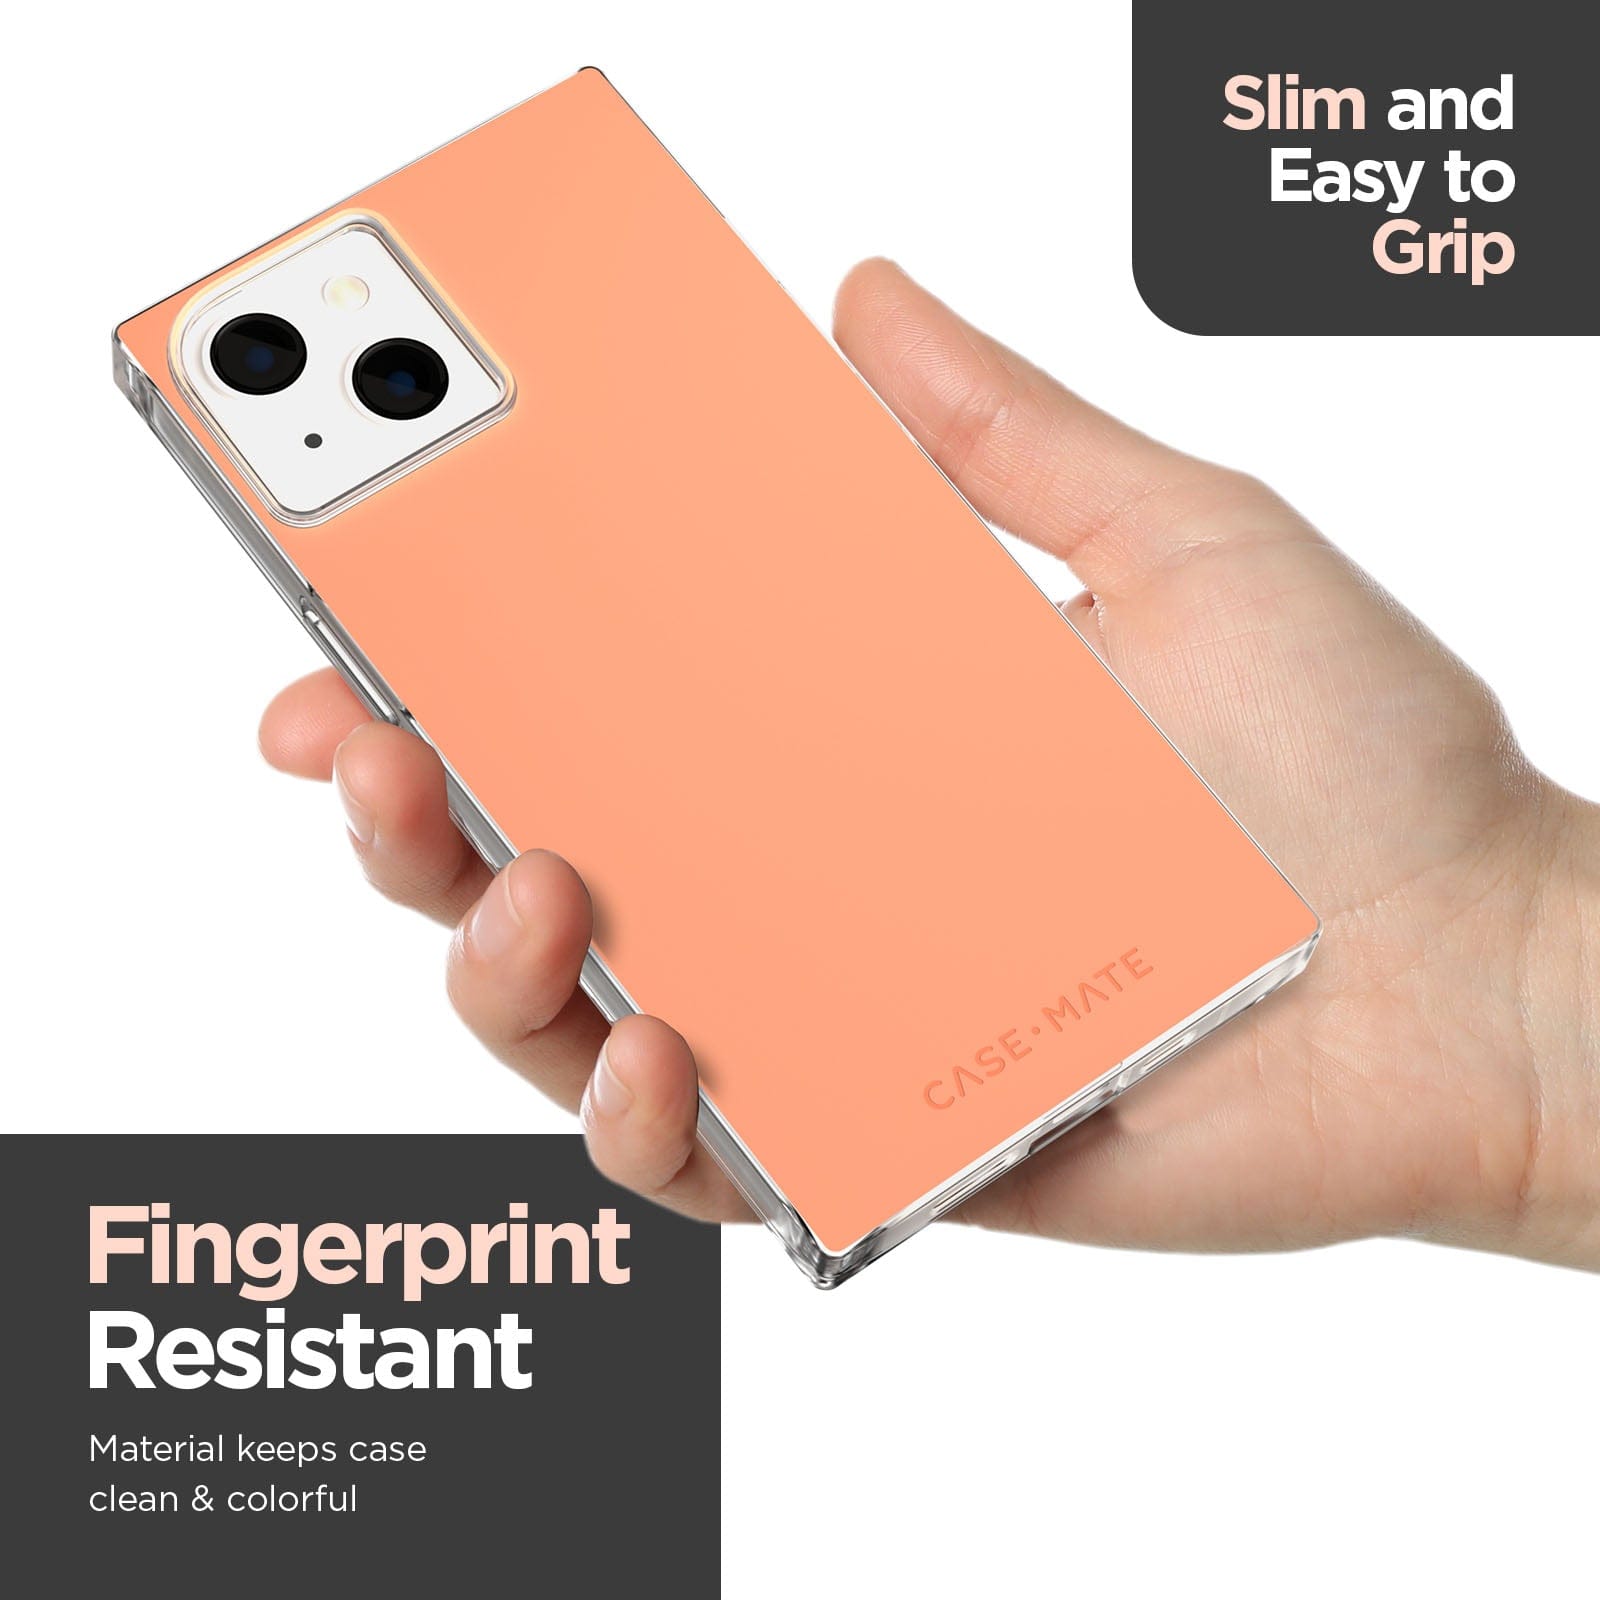 Slim and easy to grip. Fingerprint resistant materials keeps case clean and colorful. color::Clay Pink